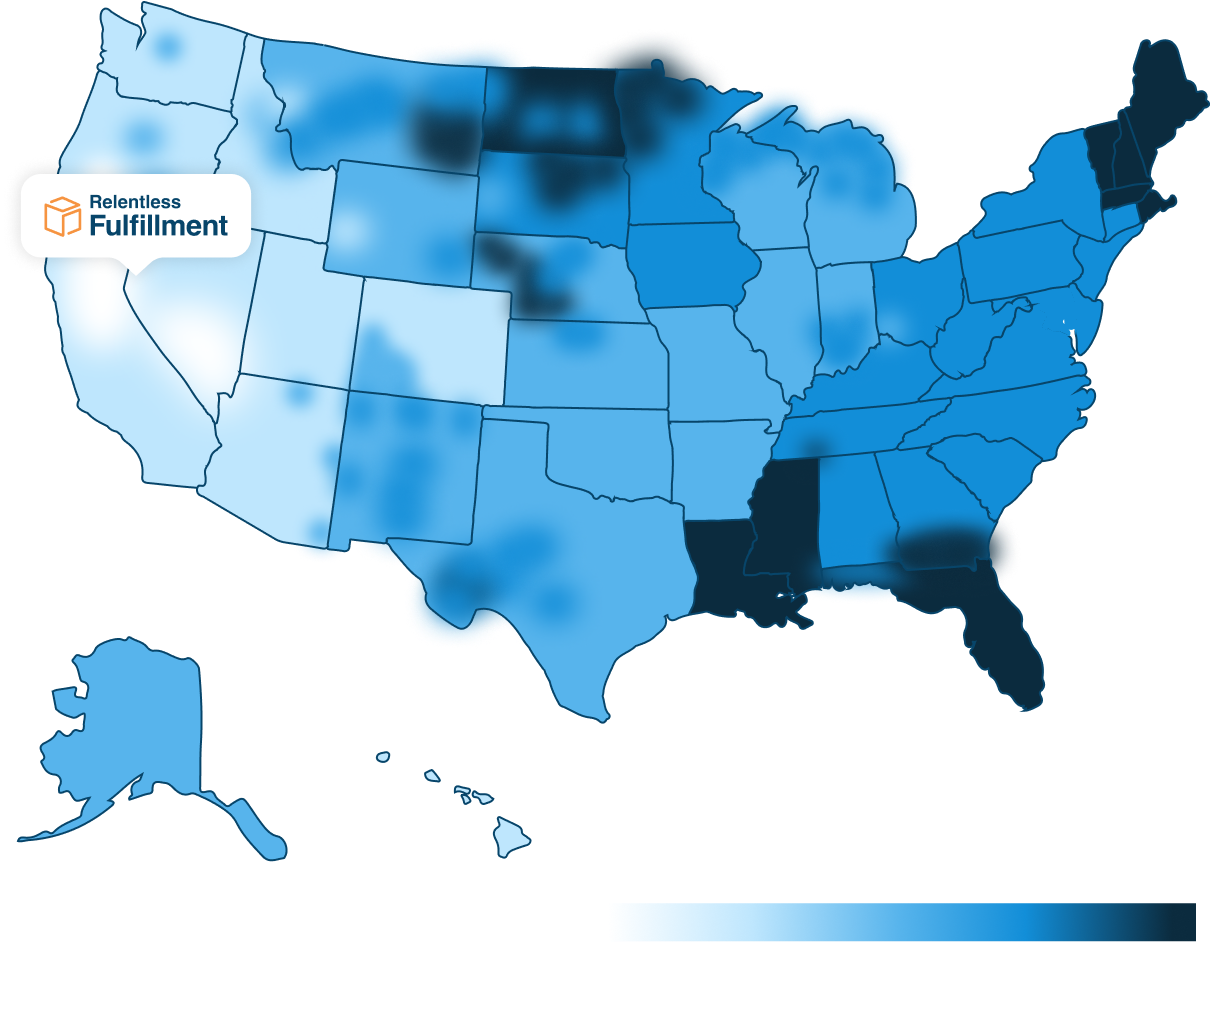 Map of United States color coded based on days in transit